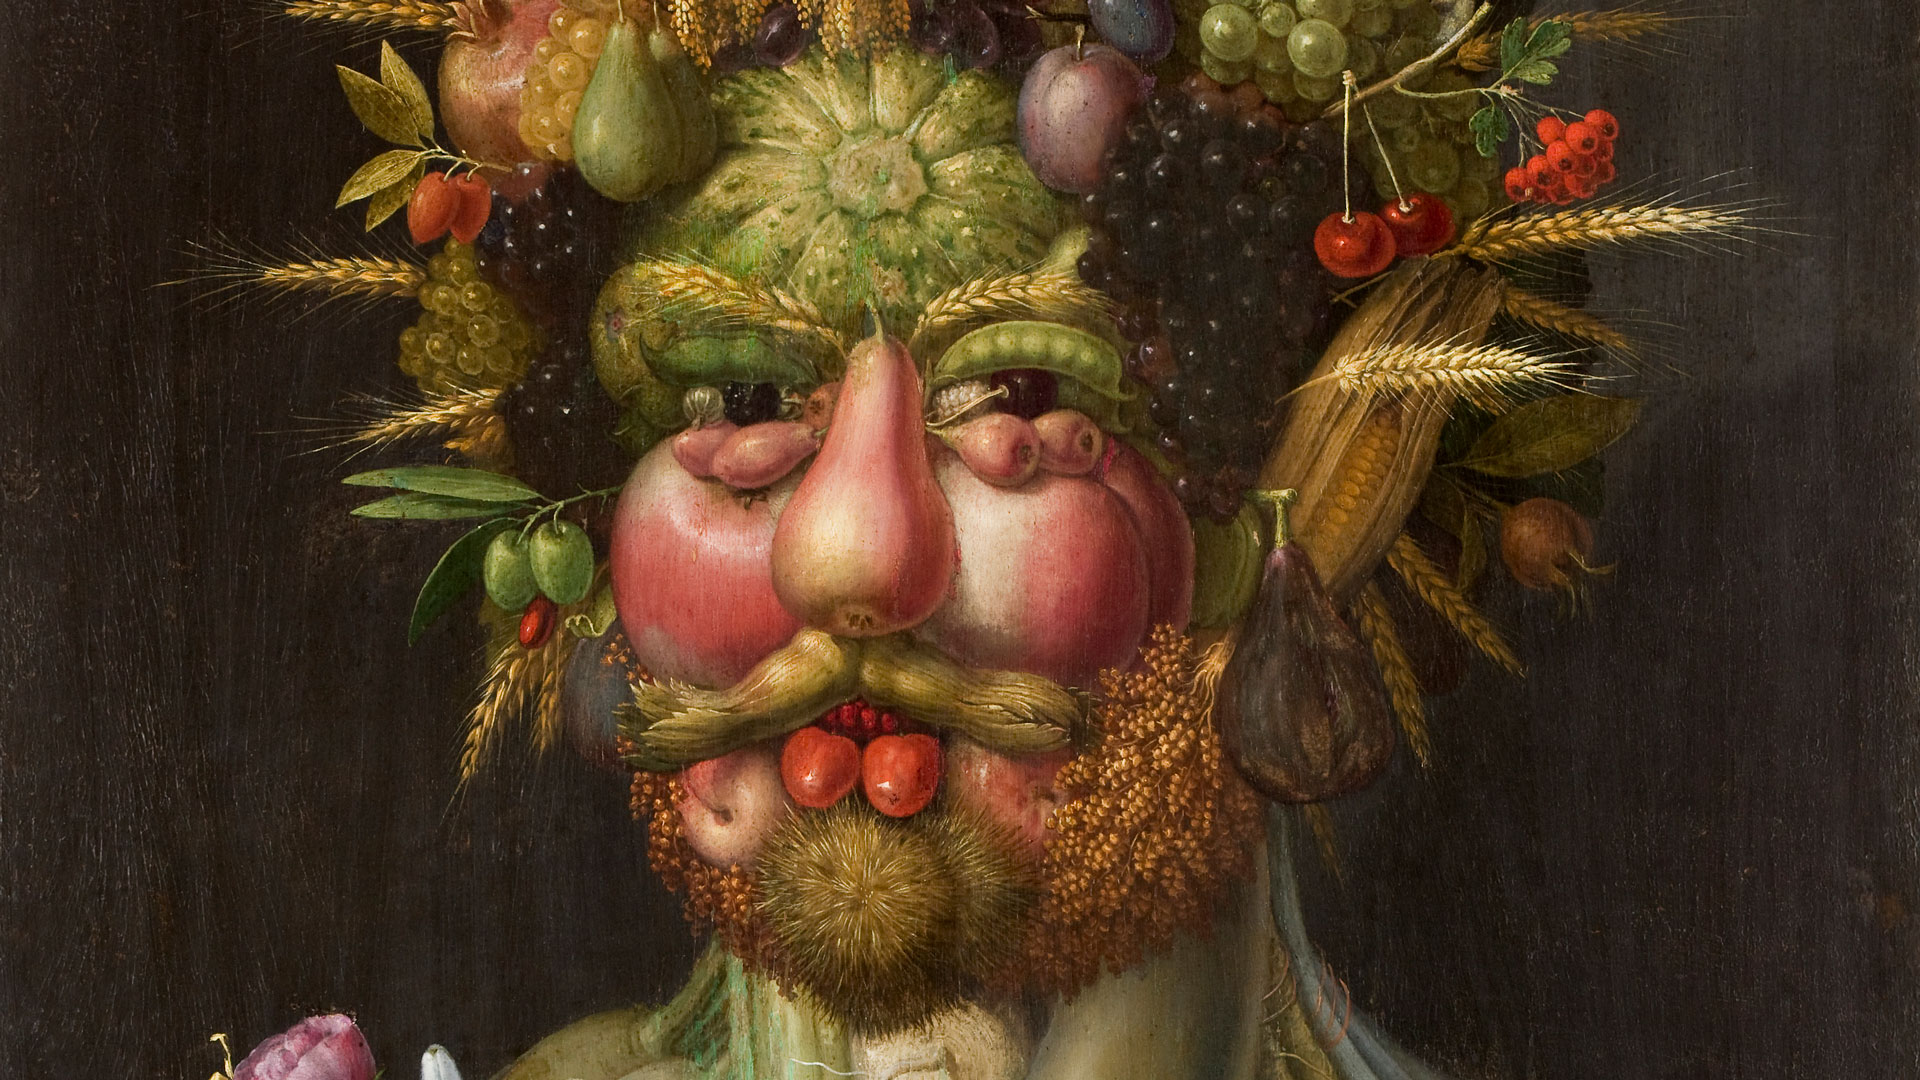 Portrait of Vertumnus, a man whose face is painted with fruits, berries and vegetables.